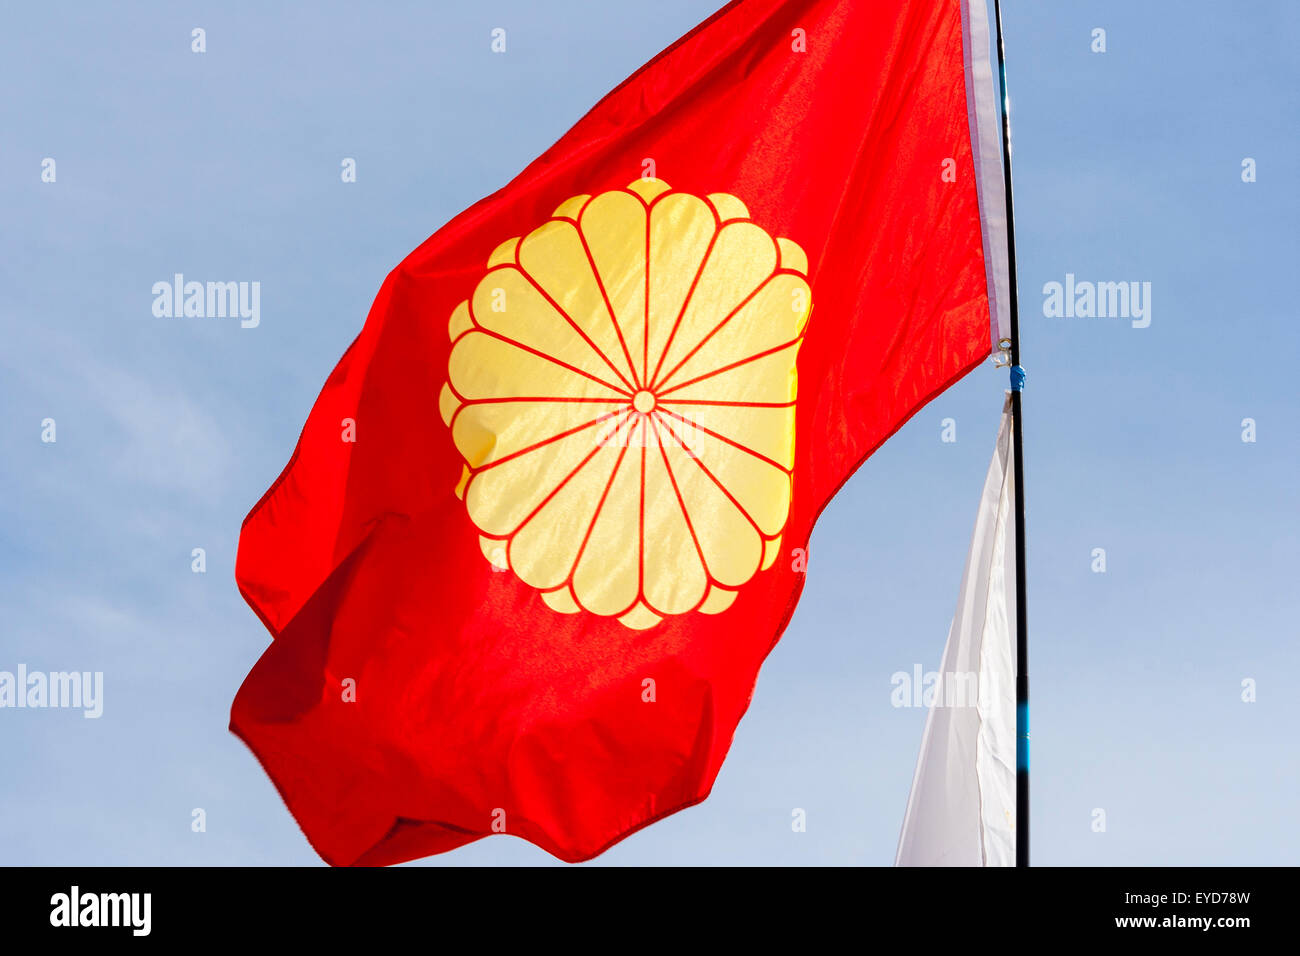 Japanese Imperial Flag of the Emperor, the Golden chrysanthemum, fluttering in the wind against a blue sky. Gold chrysanthemum symbol on red. Stock Photo